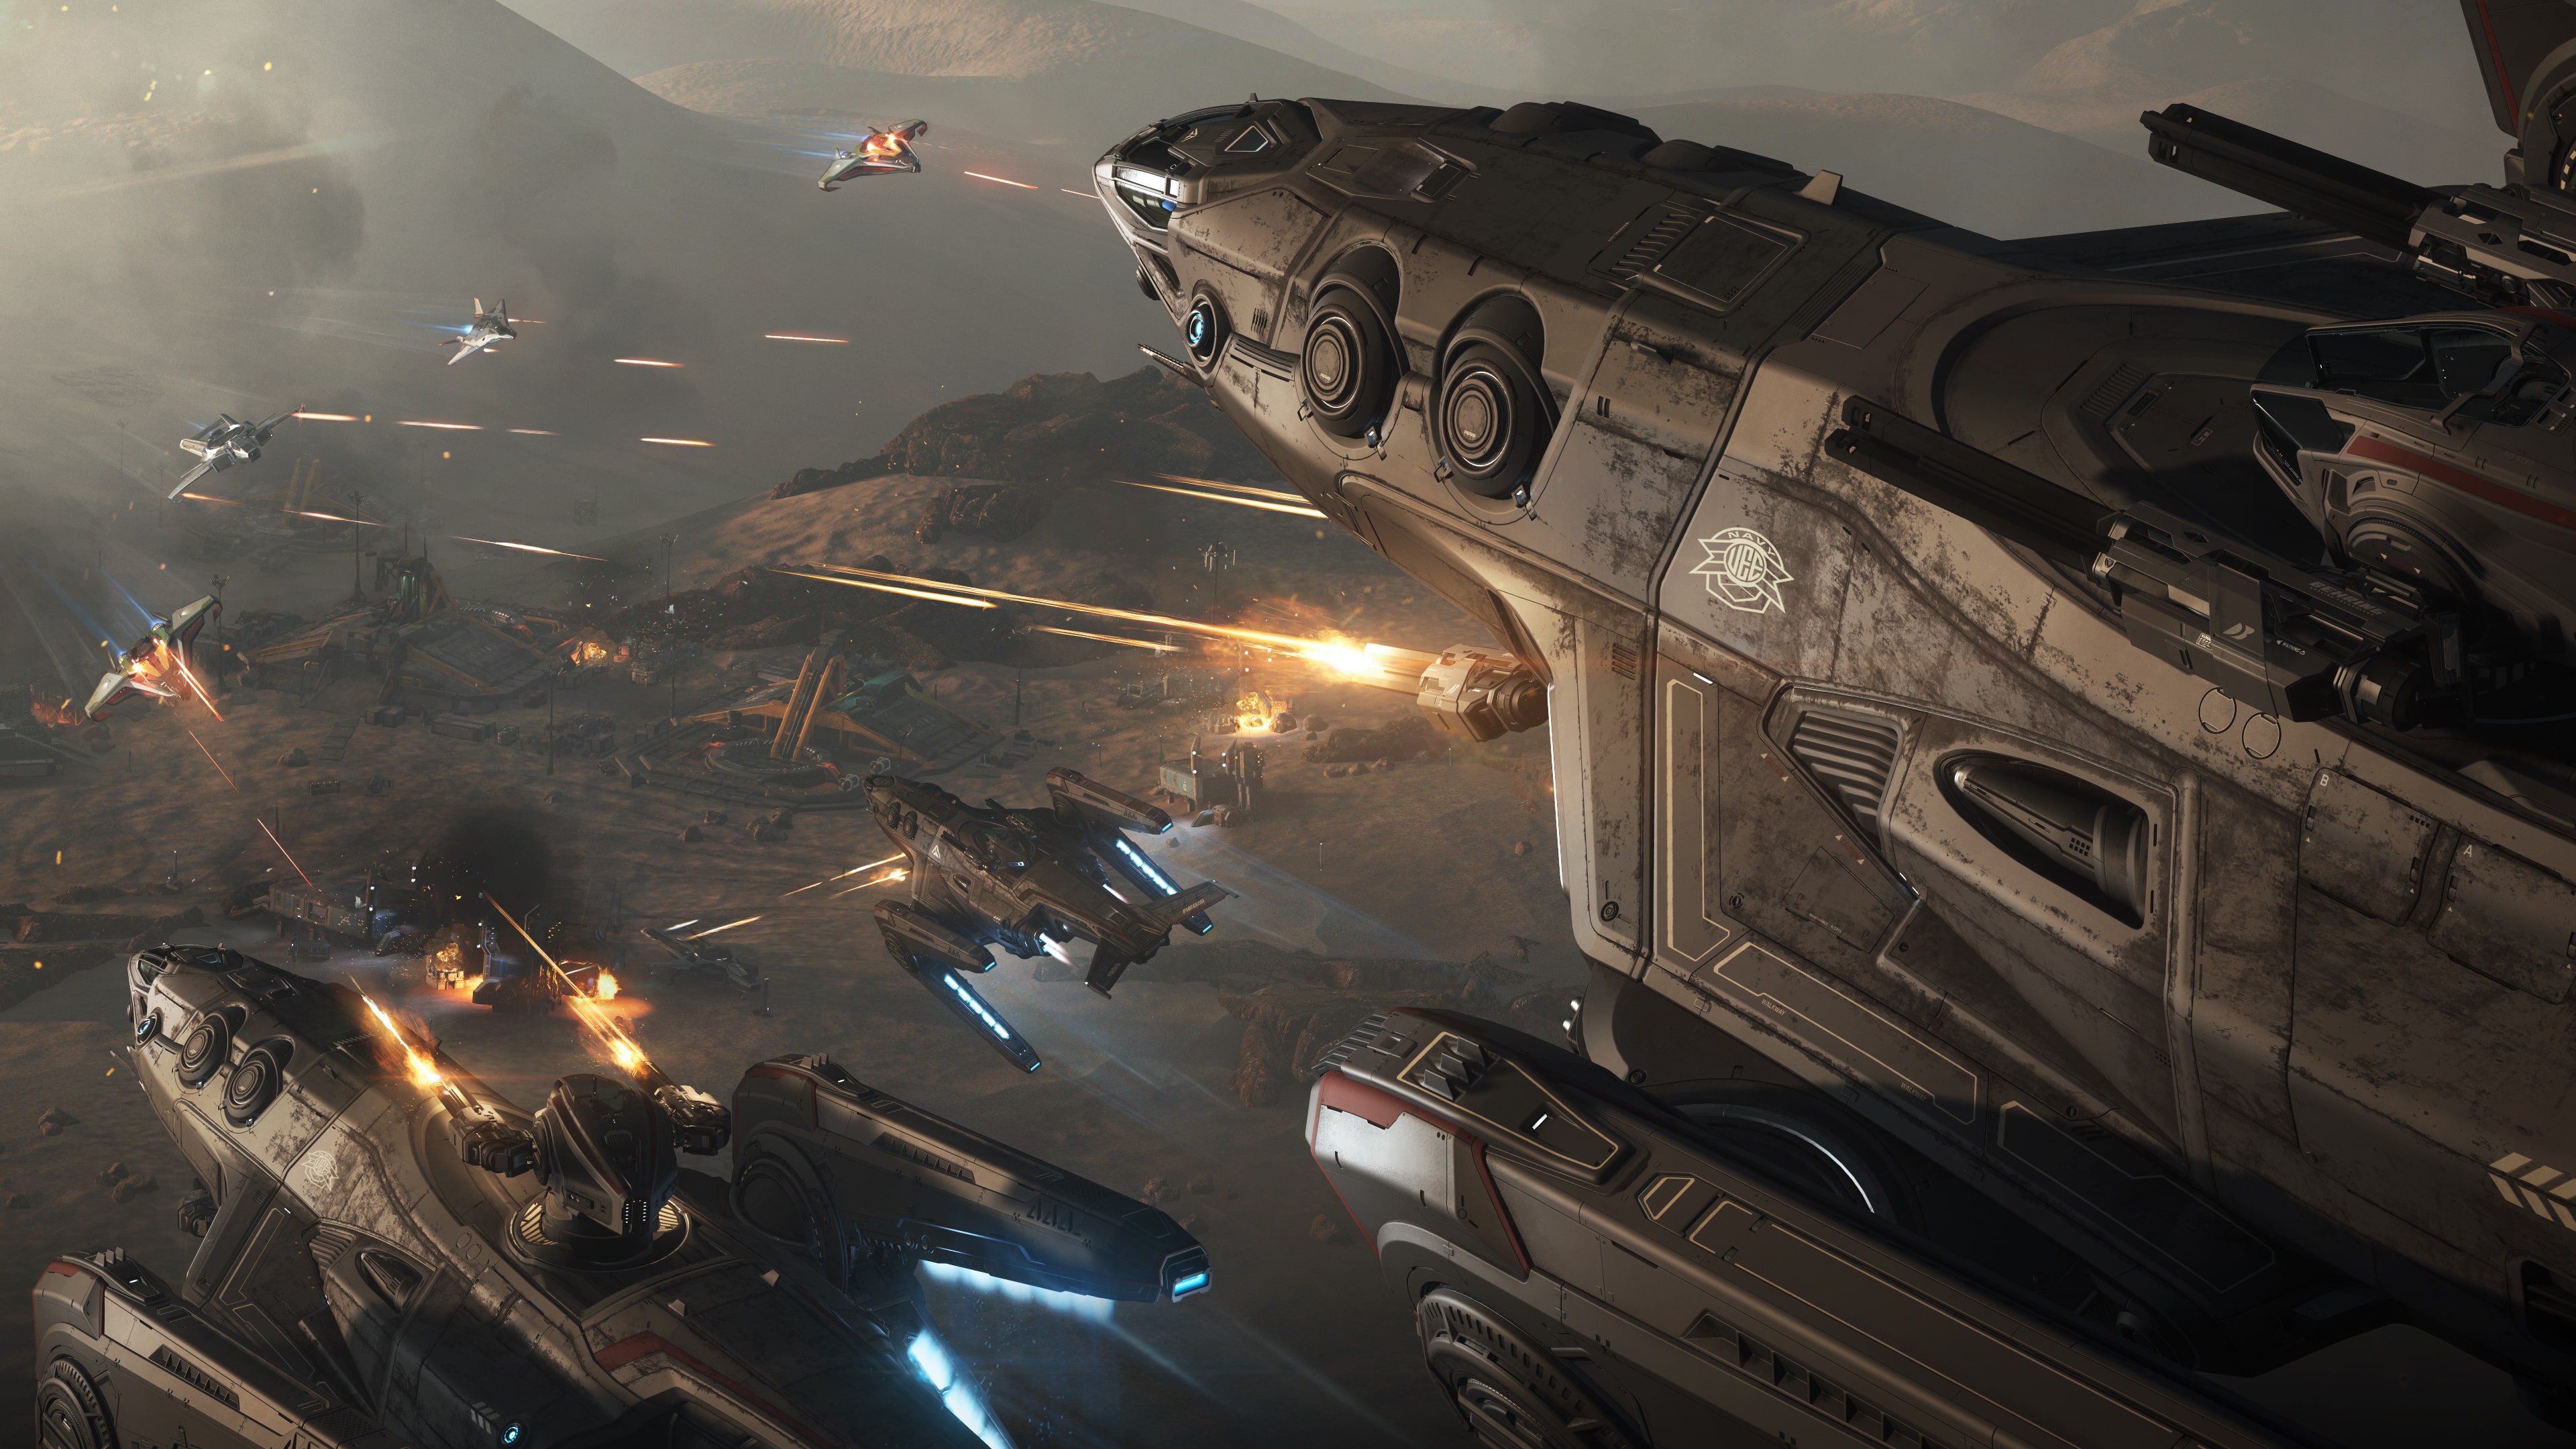 Play Star Citizen for free during Invictus Launch Week — GAMINGTREND